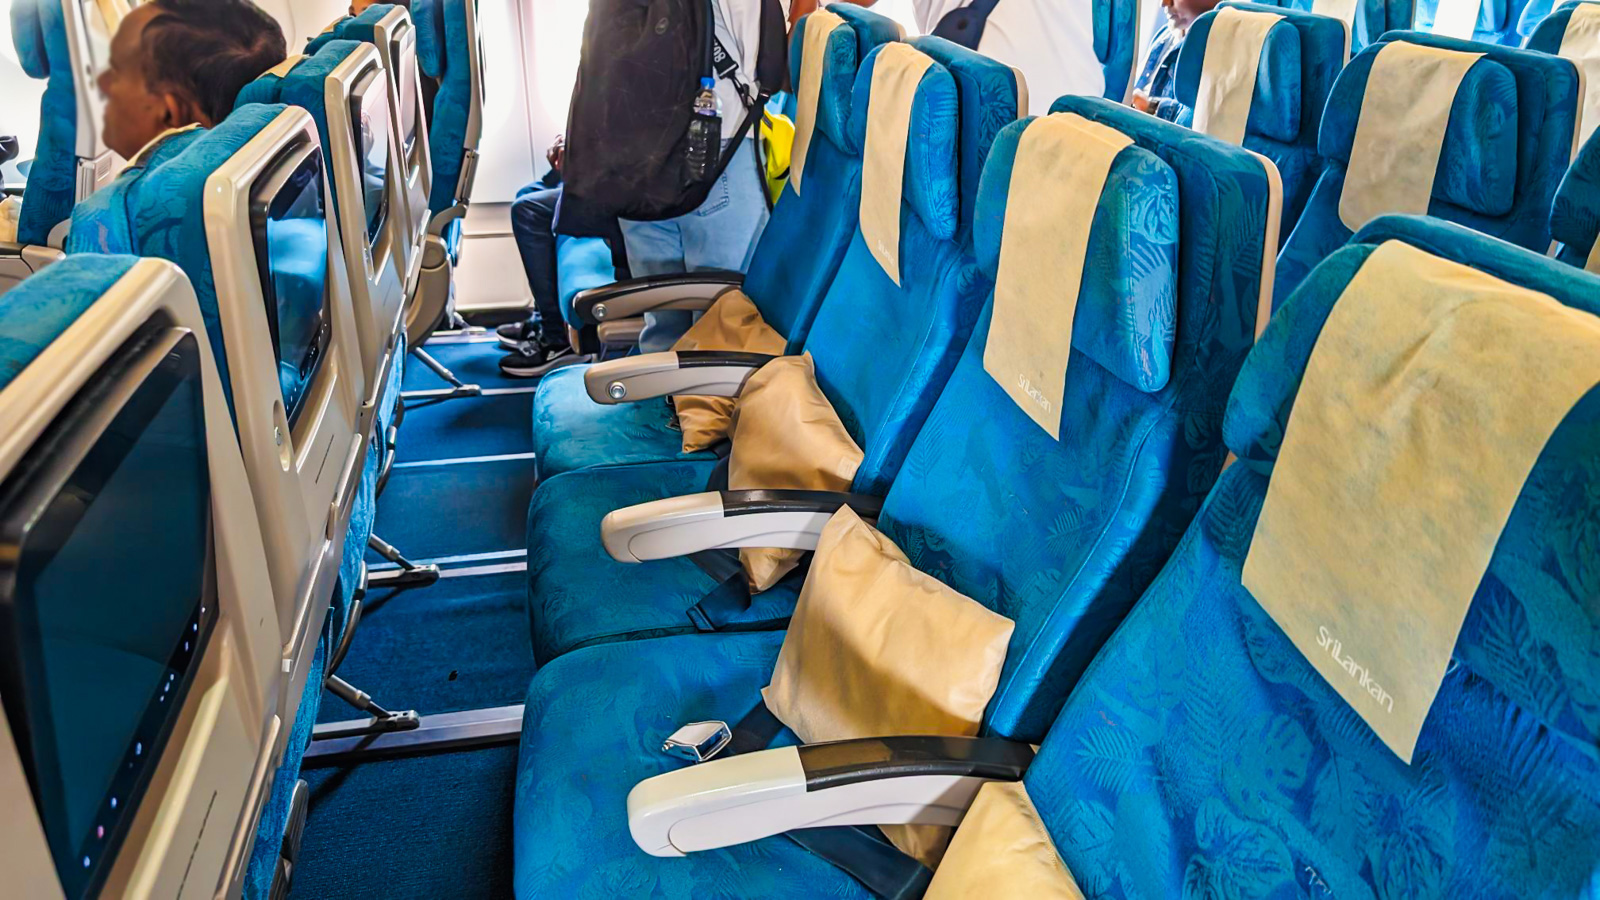 Economy cabin on SriLankan Airlines Airbus A330-200